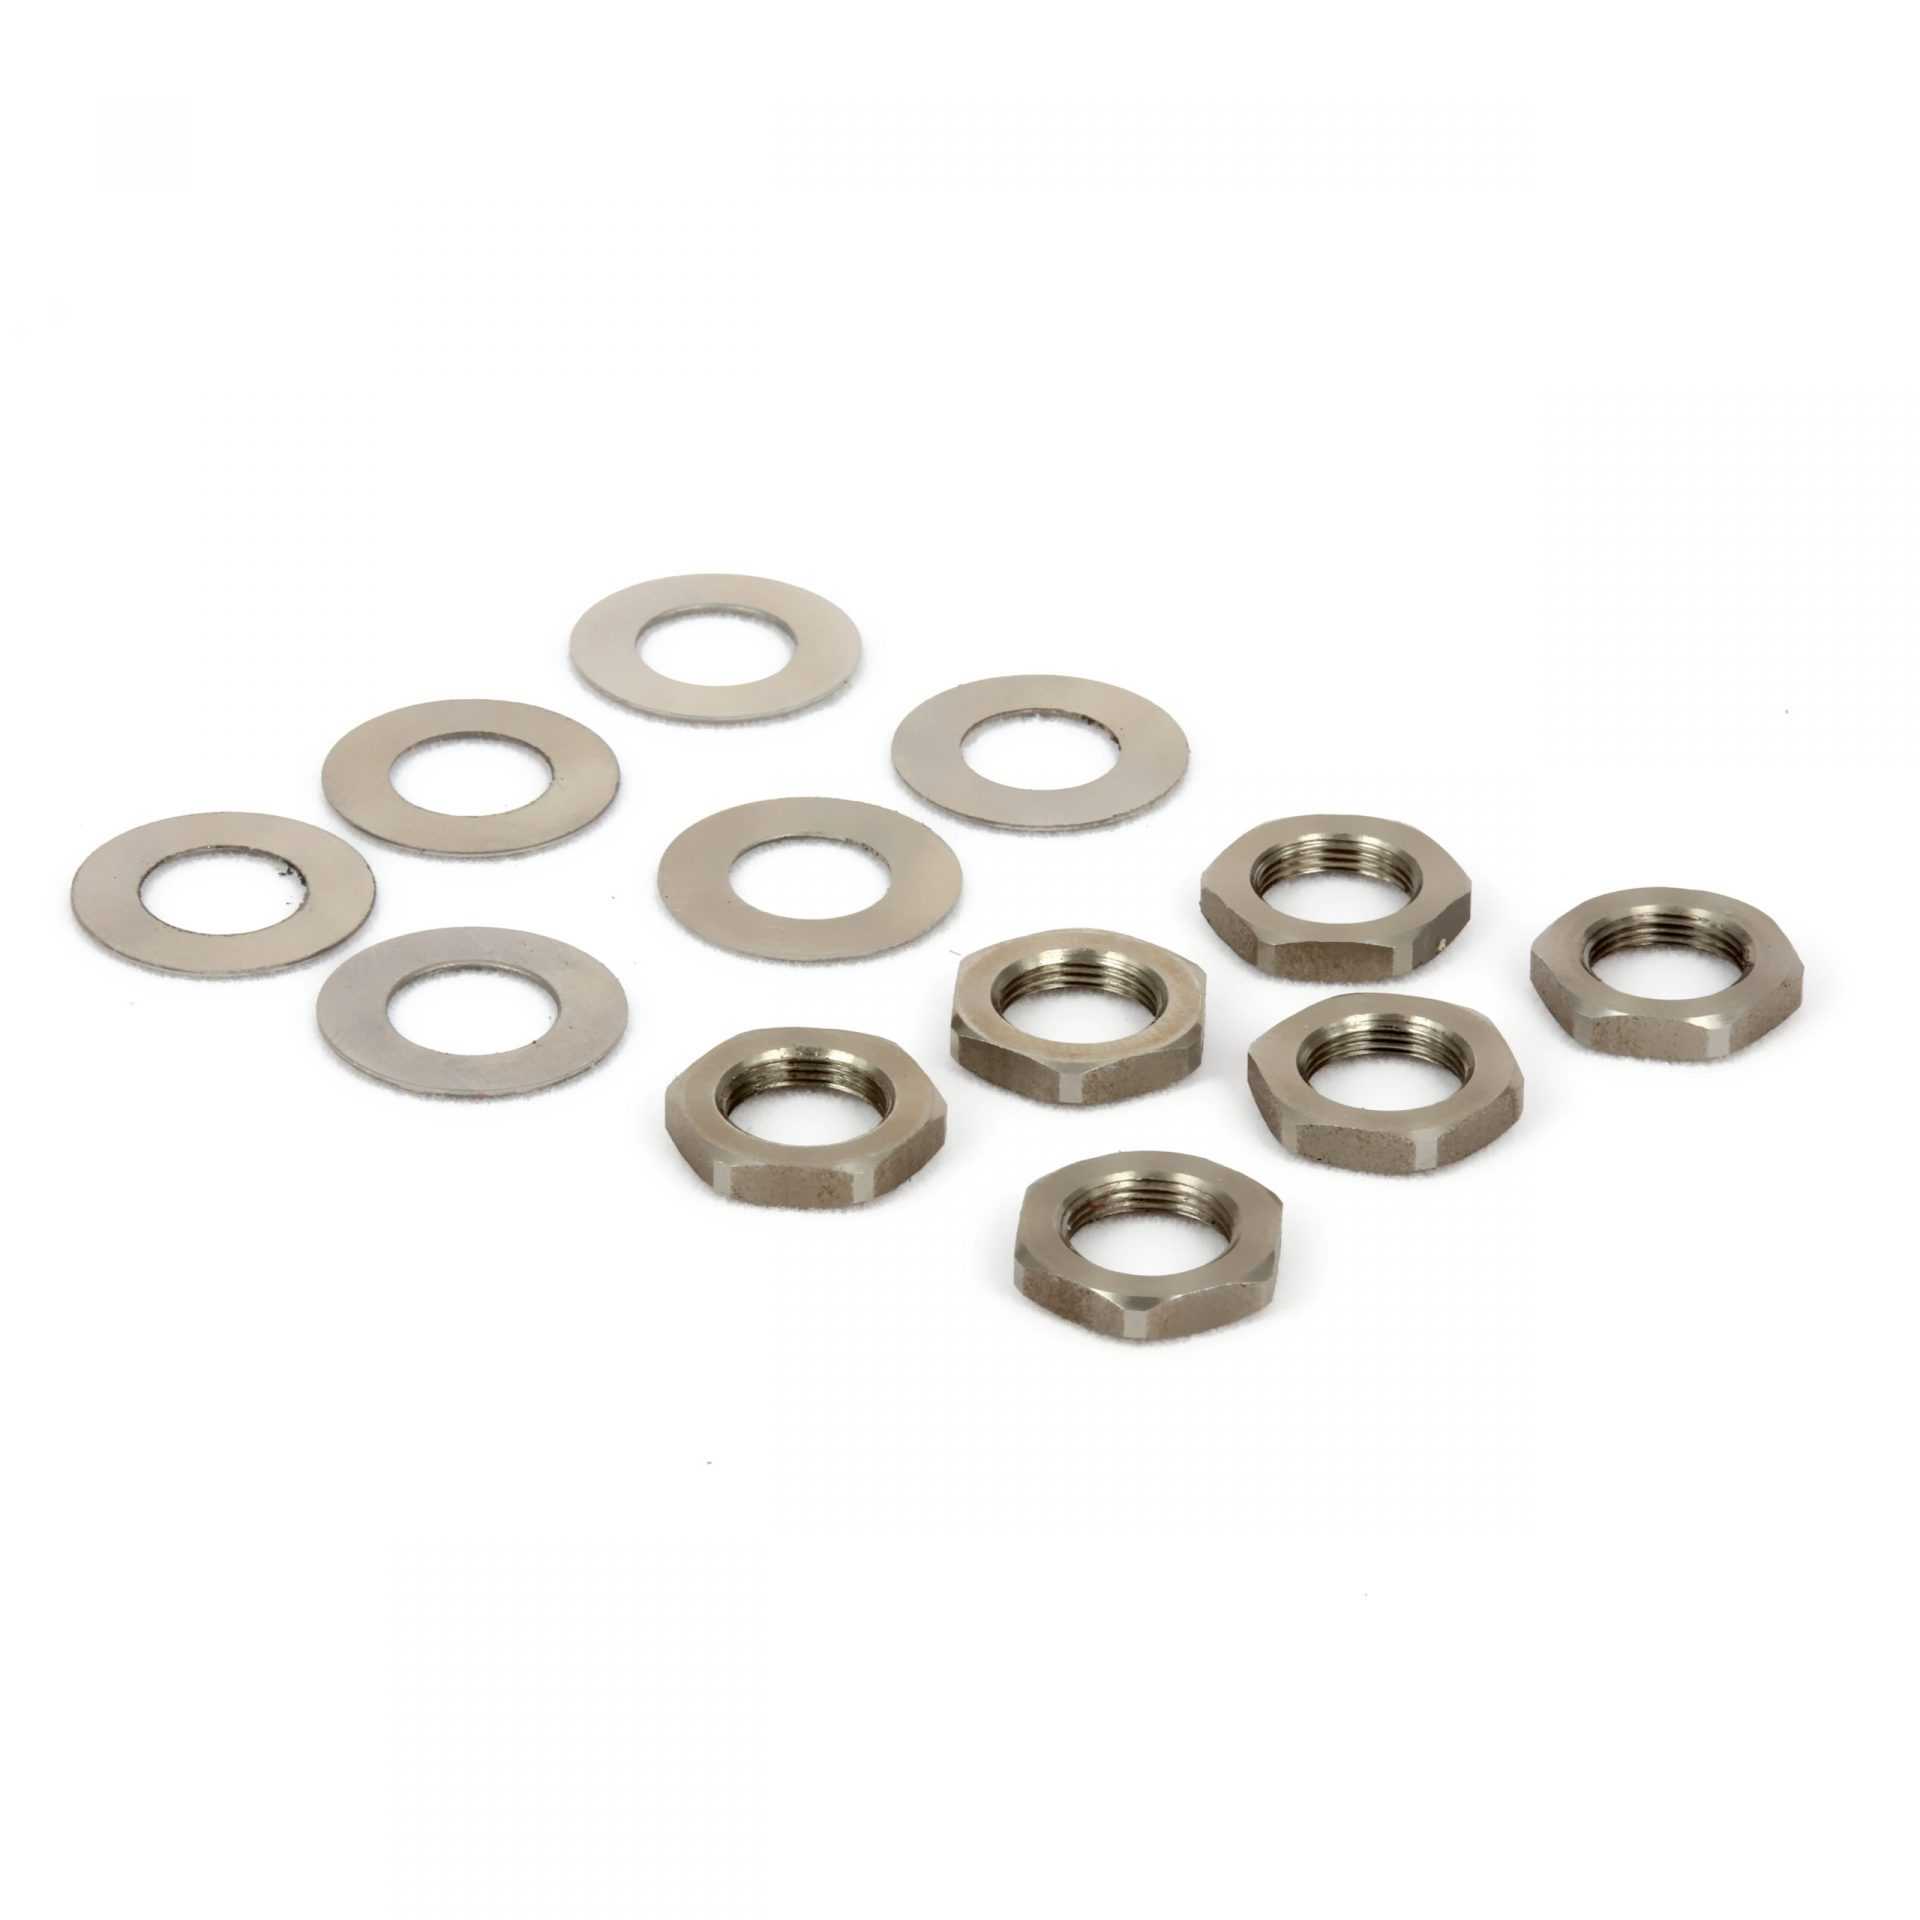 Tronical Spare Parts Hex Nuts and Washers Set for TronicalTune Guitar Tuner - unique Tronical Professional Tune Sytem autotunes Guitar